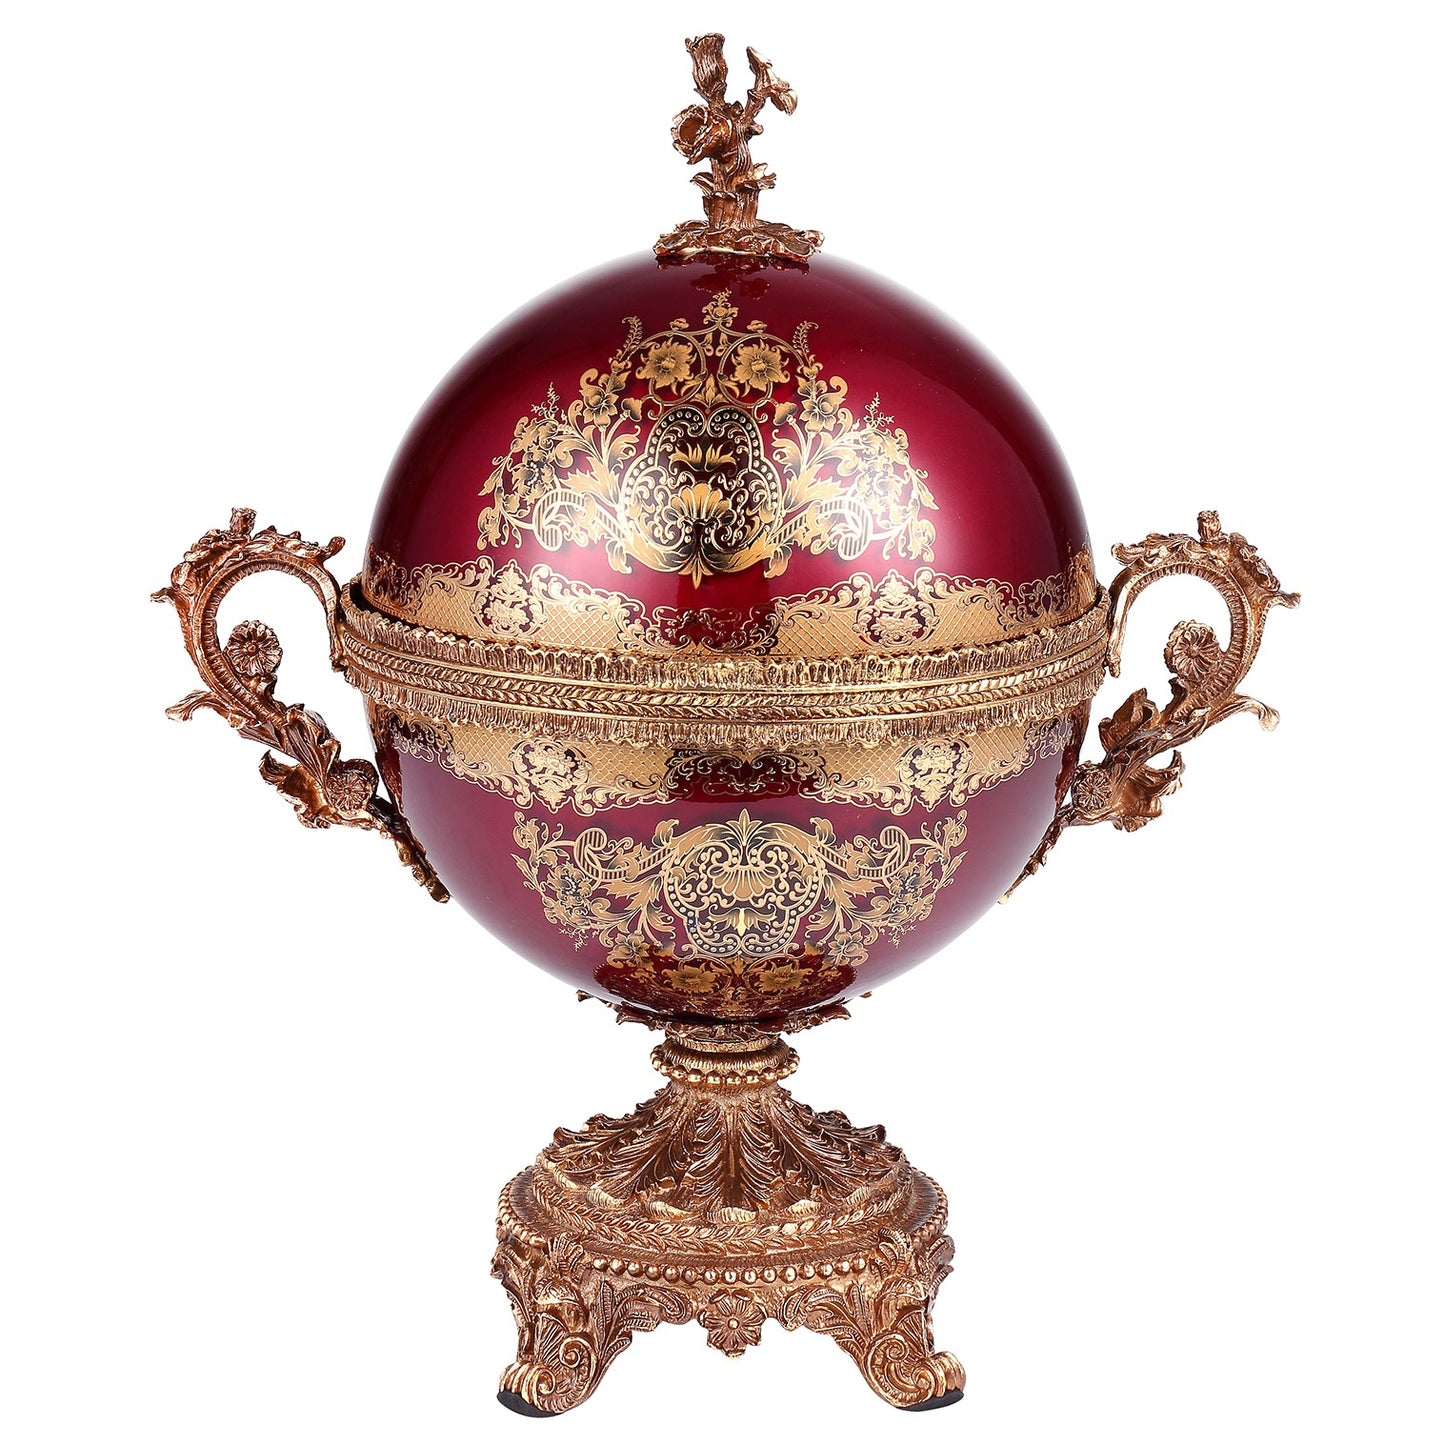 Vase in Bronze & Ruby Red & Gold Finish AC6026 European Traditional Victorian